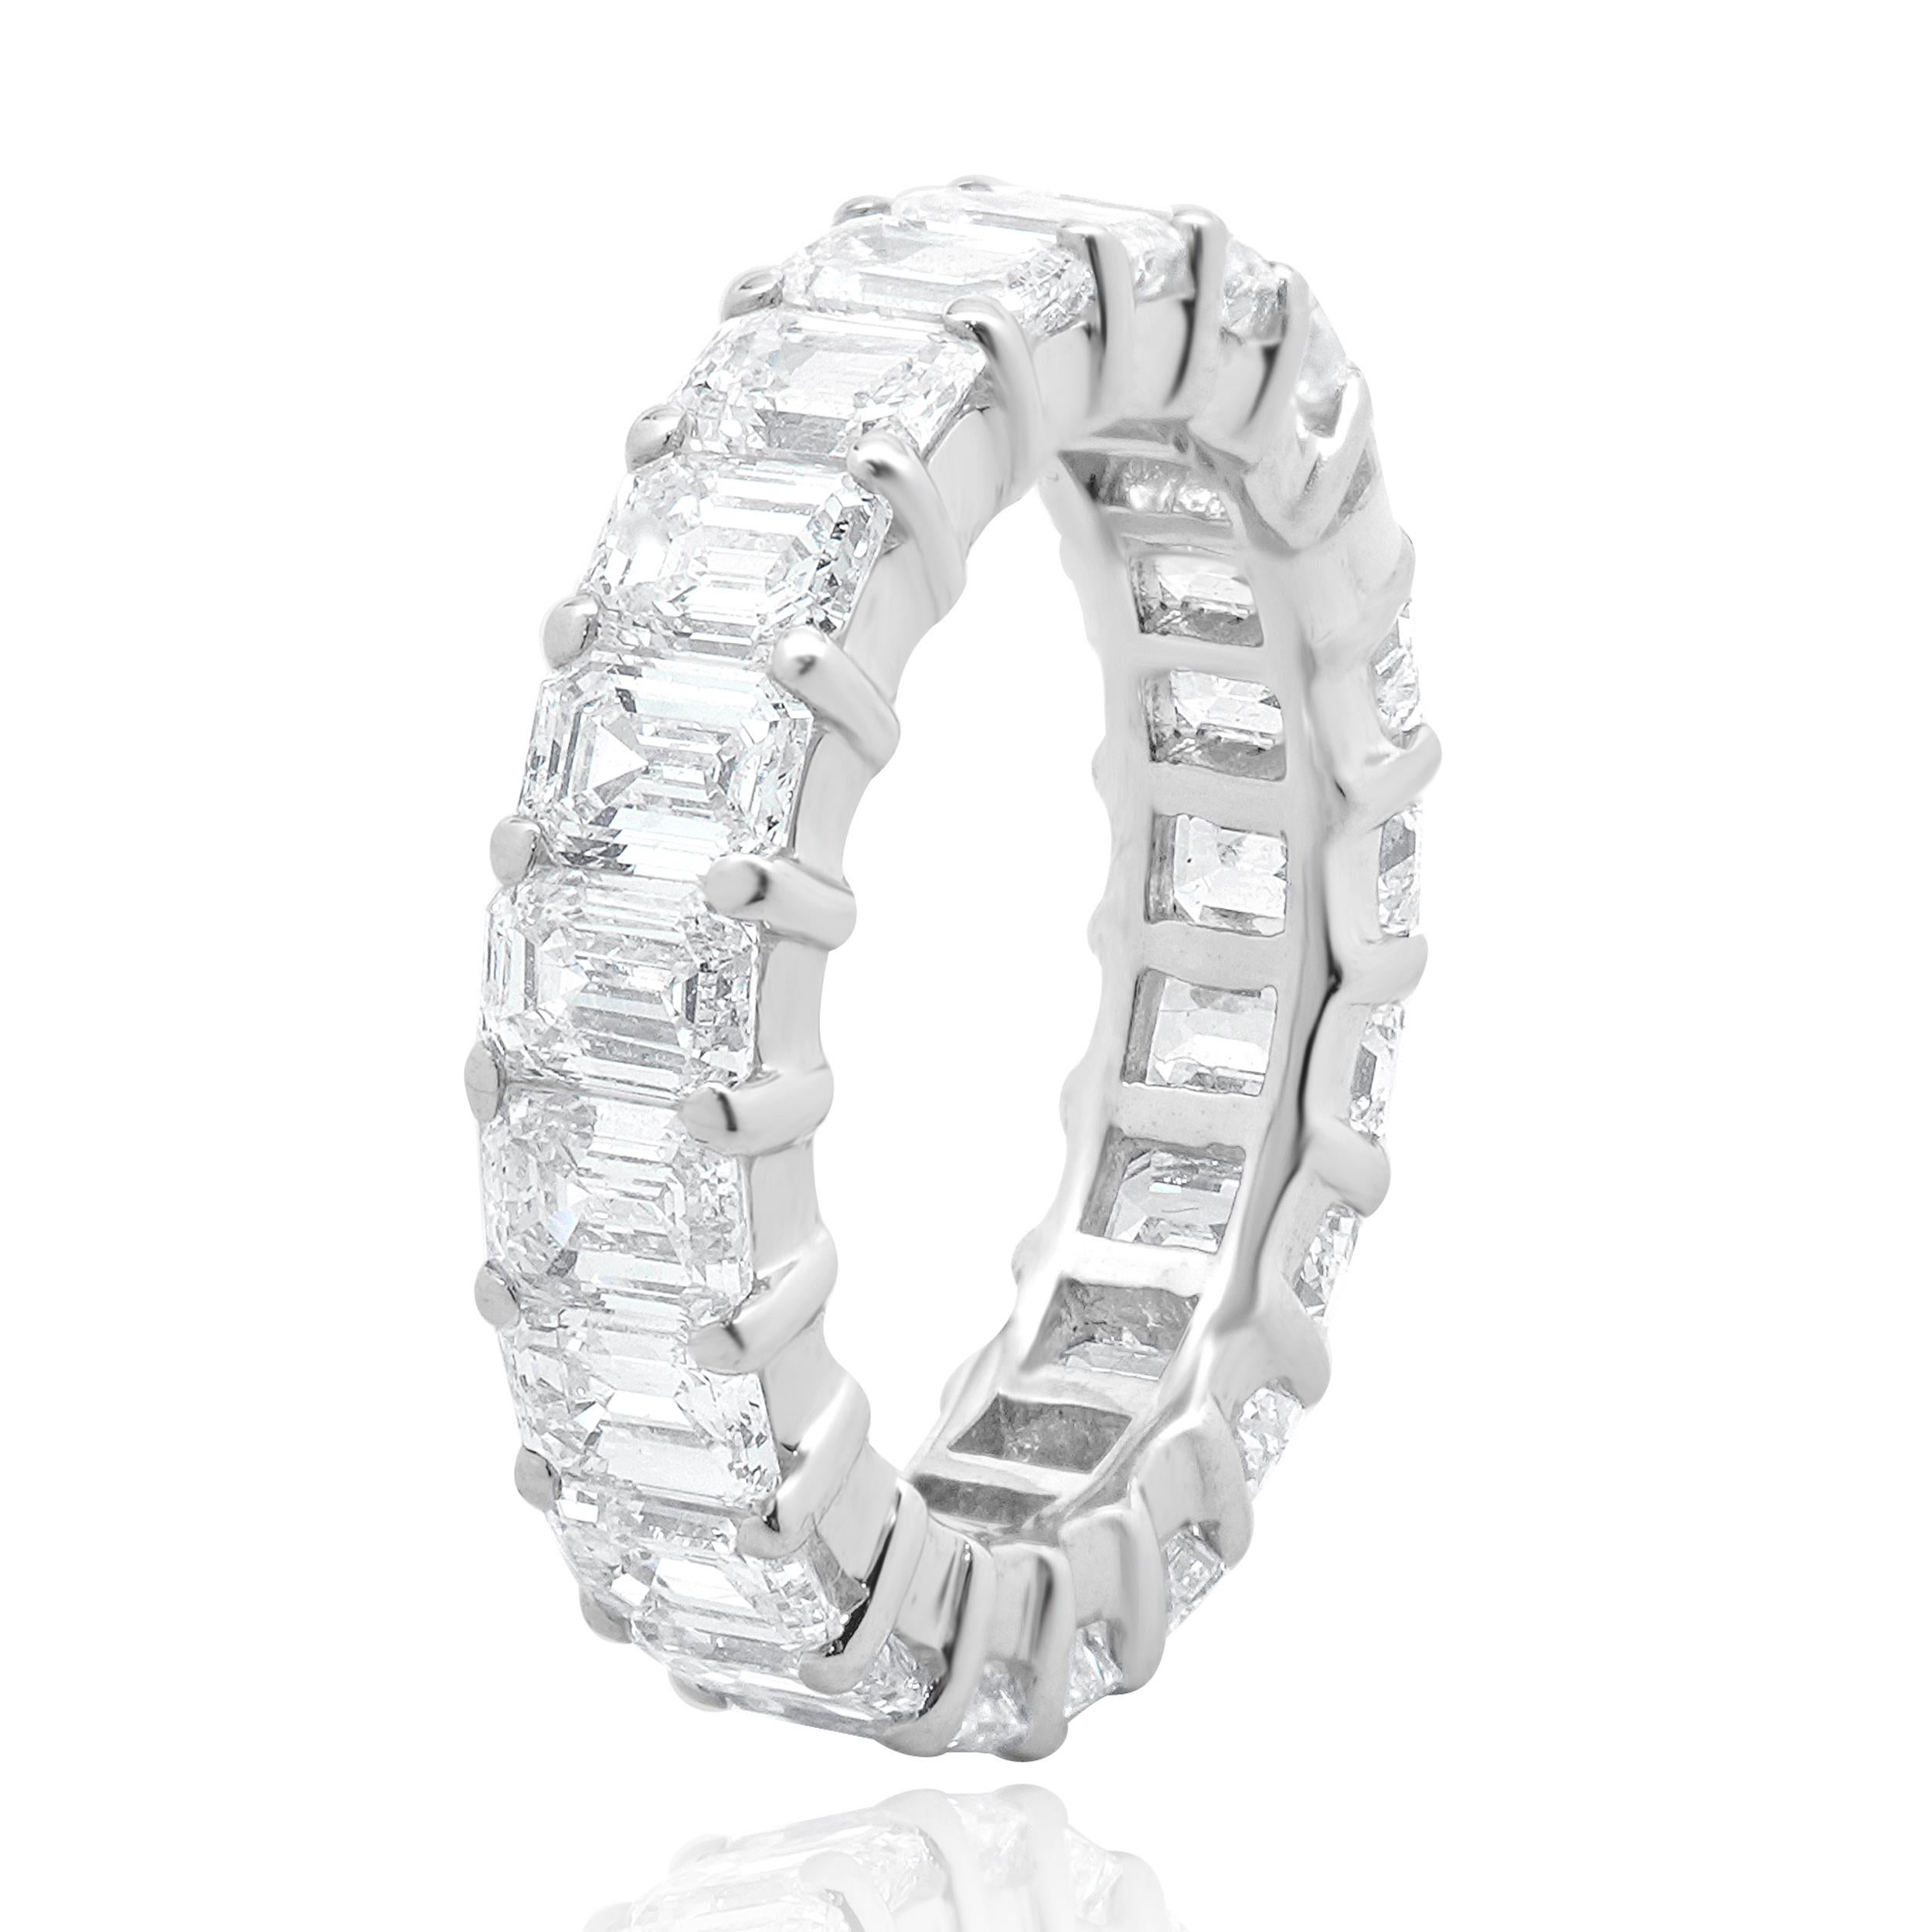 Designer: custom
Material: 14K white gold
Diamond: 21 emerald cut = 5.89cttw
Color: G / H
Clarity: VS-SI1
Ring size: 5.5 (please allow two additional shipping days for sizing requests)
Weight: 4.37 grams
